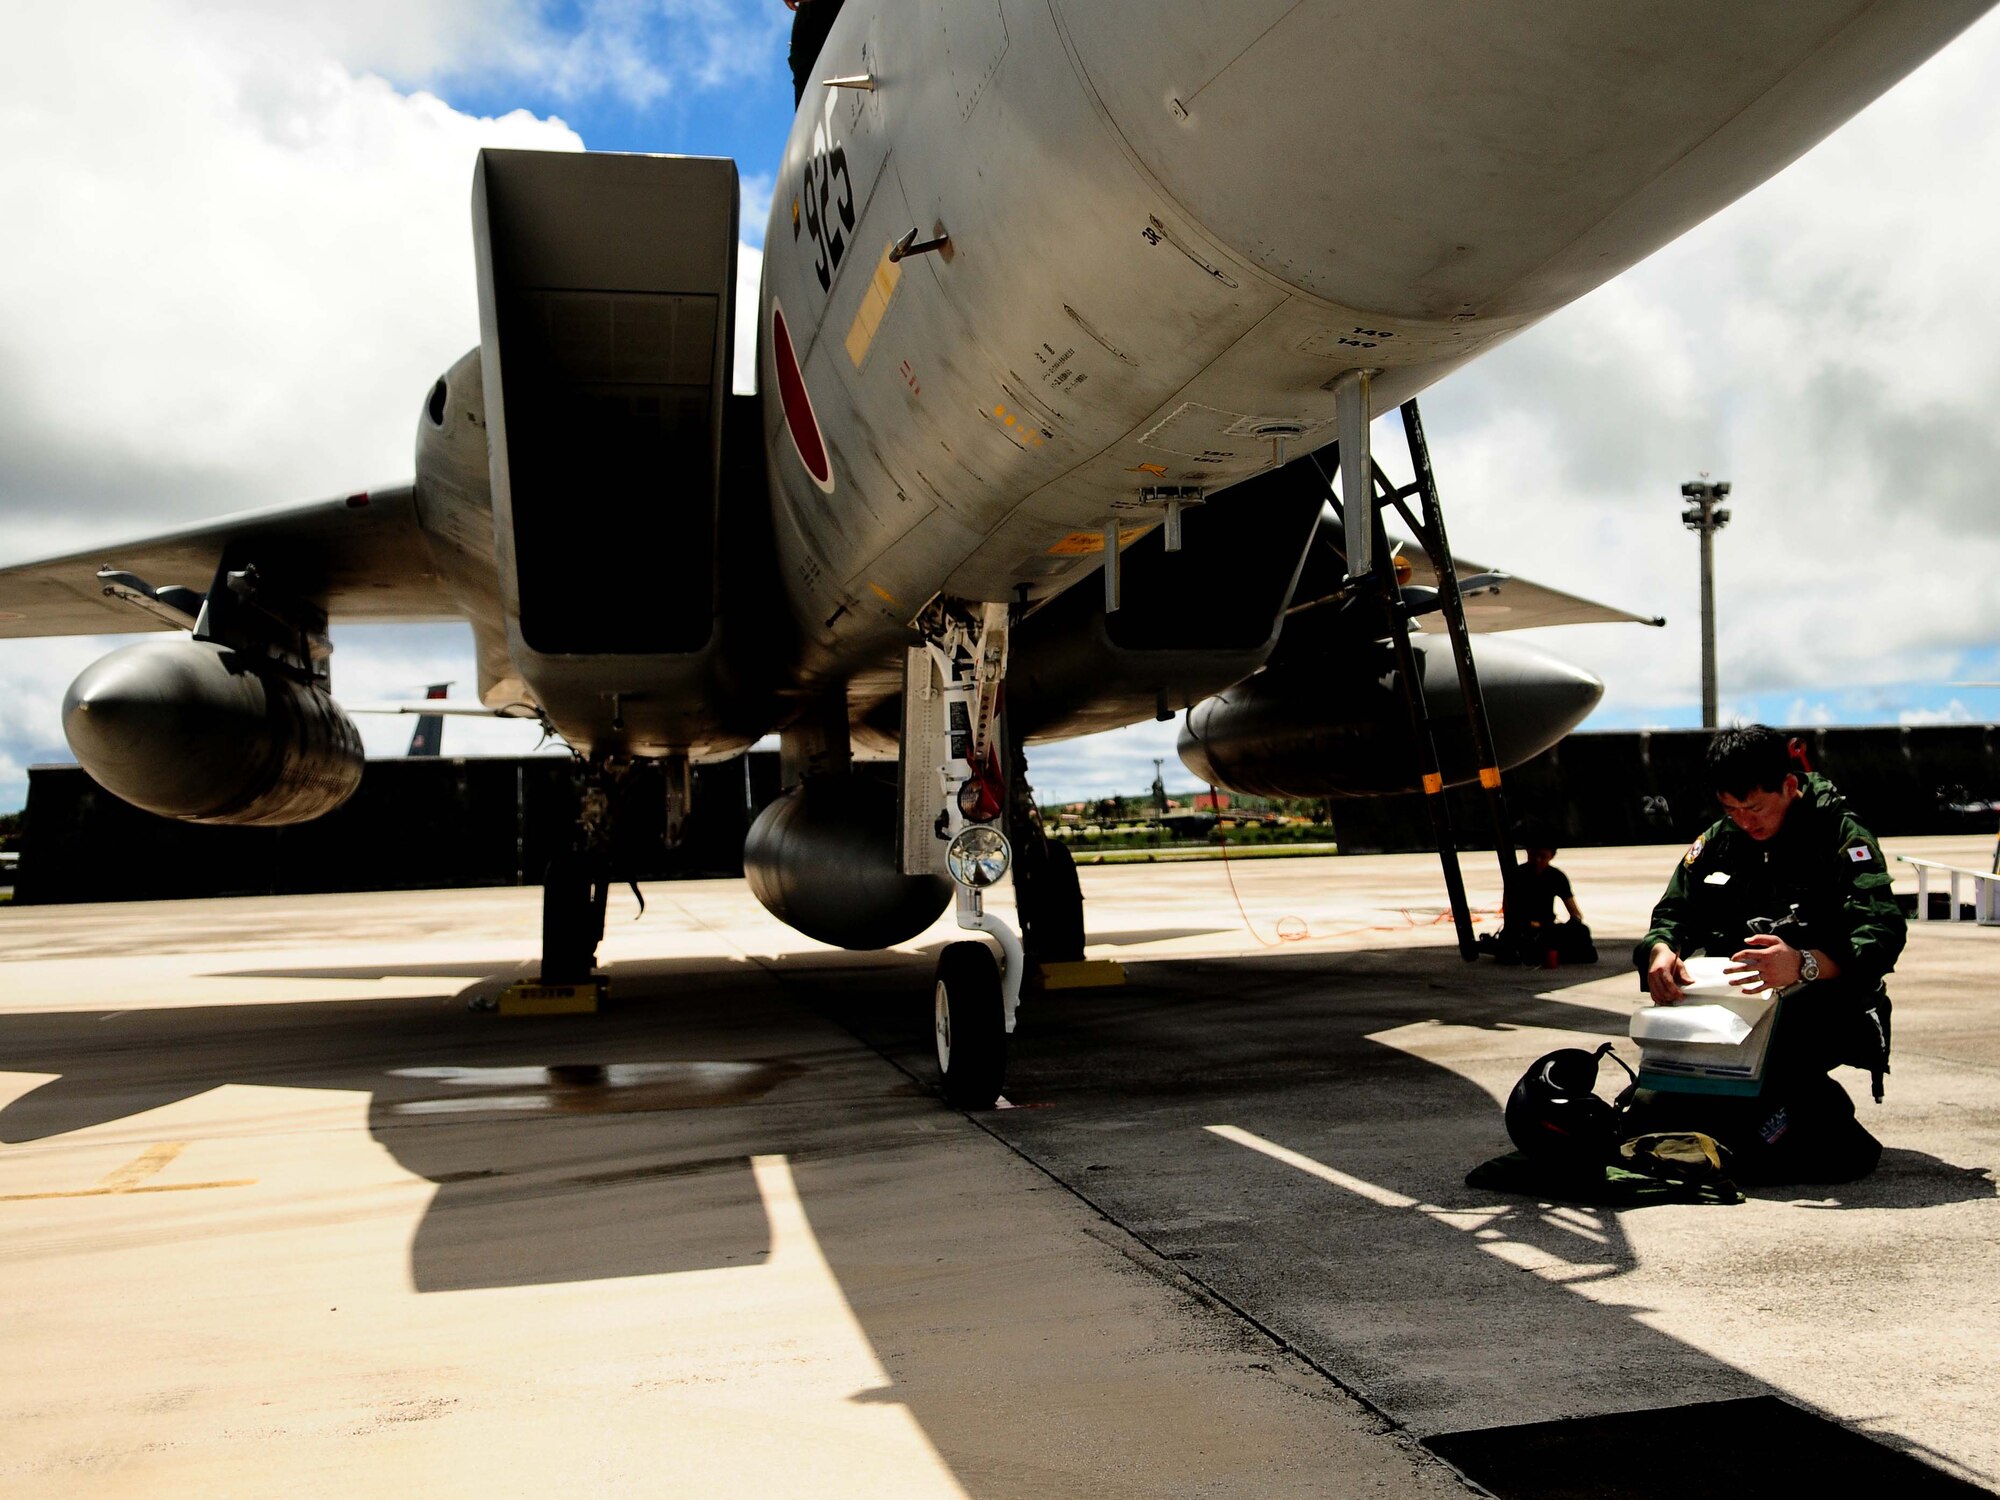 ANDERSEN AIR FORCE BASE, Guam - An Japan Air Self-Defense Force pilot performs post-flight checks  on  an F-15 Eagle after its arrival here Feb. 11, for the exercise Cope North 11-1. The JASDF is employing several other aircraft during this year’s two week exercise, such as the F-2A fighter, E-2C Hawkeye and C-130 Hercules. (U.S. Air Force photo/ Airman 1st Class Jeffrey Schultze)